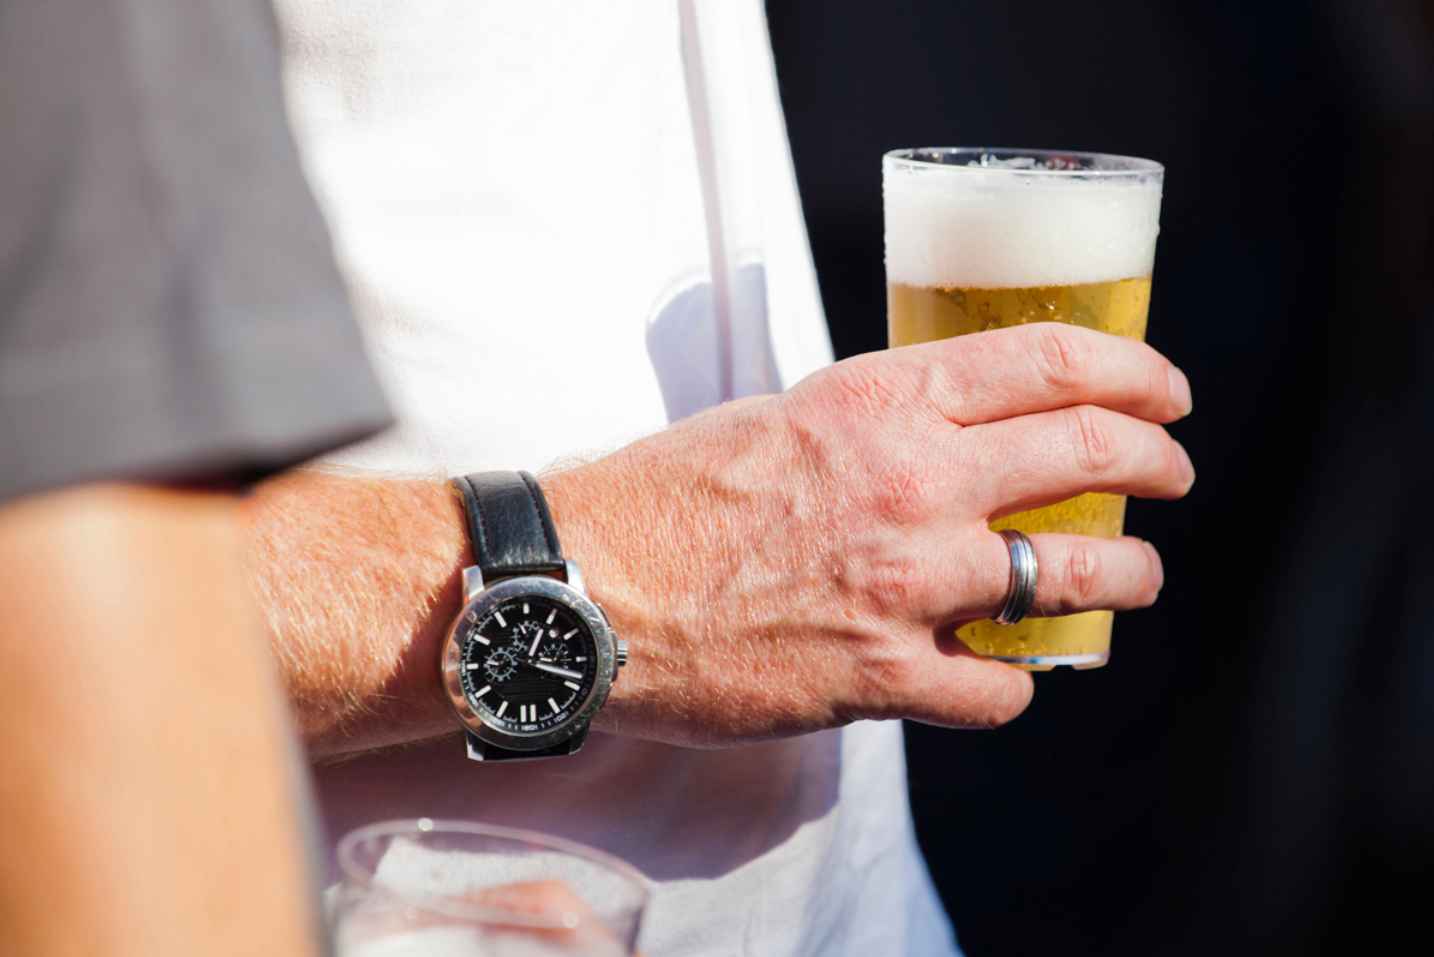 How Long Does Beer Stay in Your System